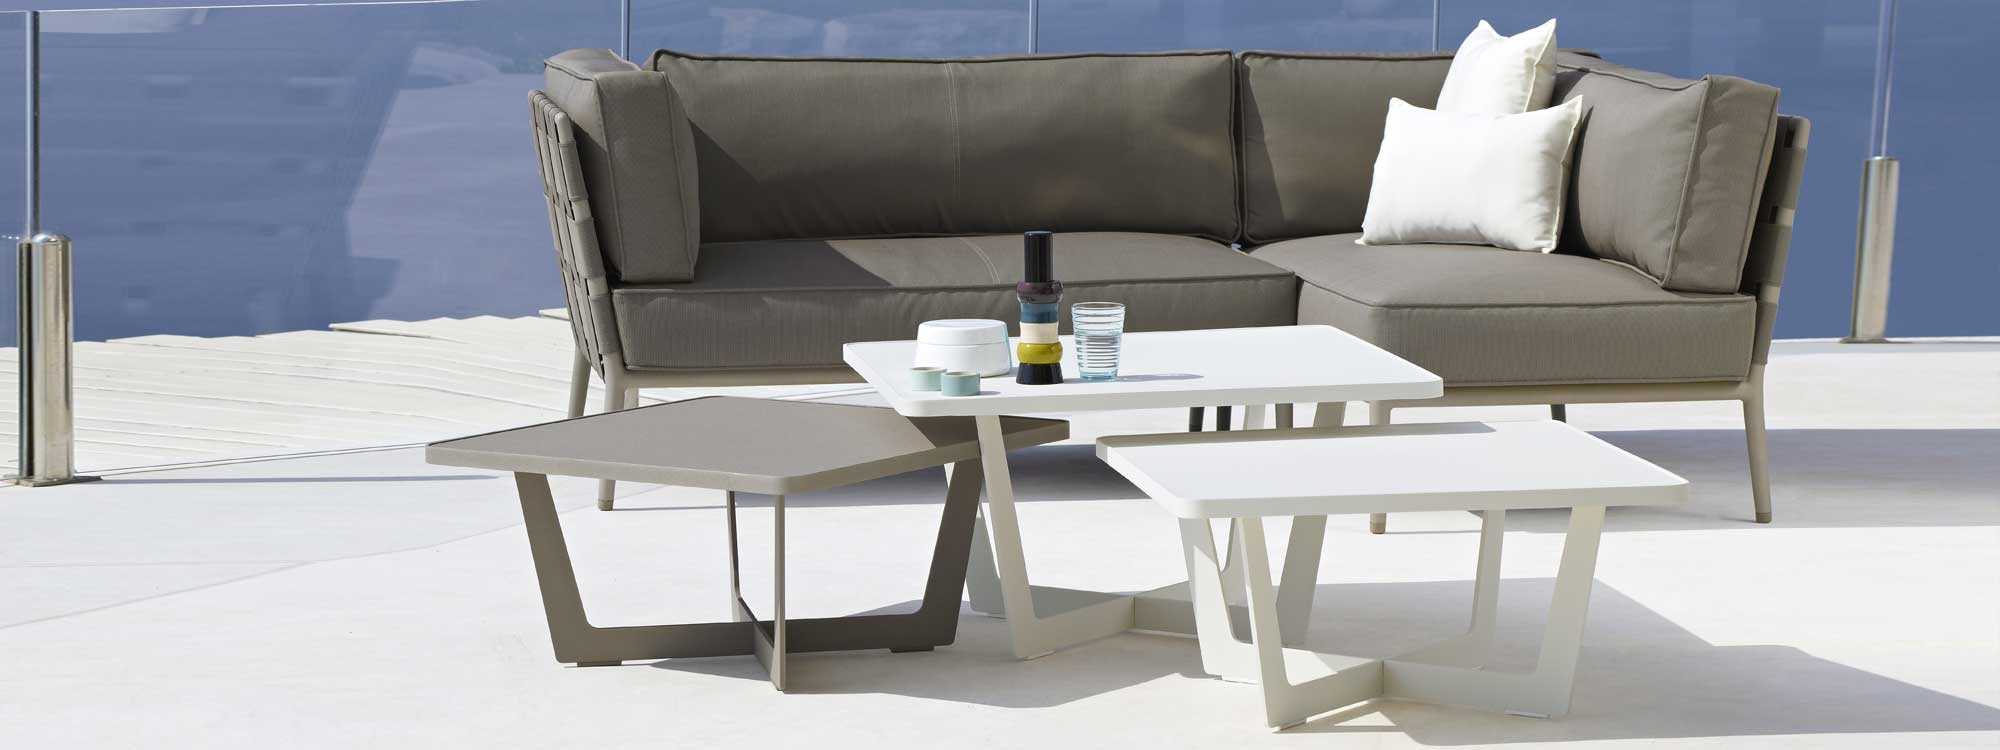 Image of Time Out outdoor low tables and Conic garden sofa by Caneline furniture